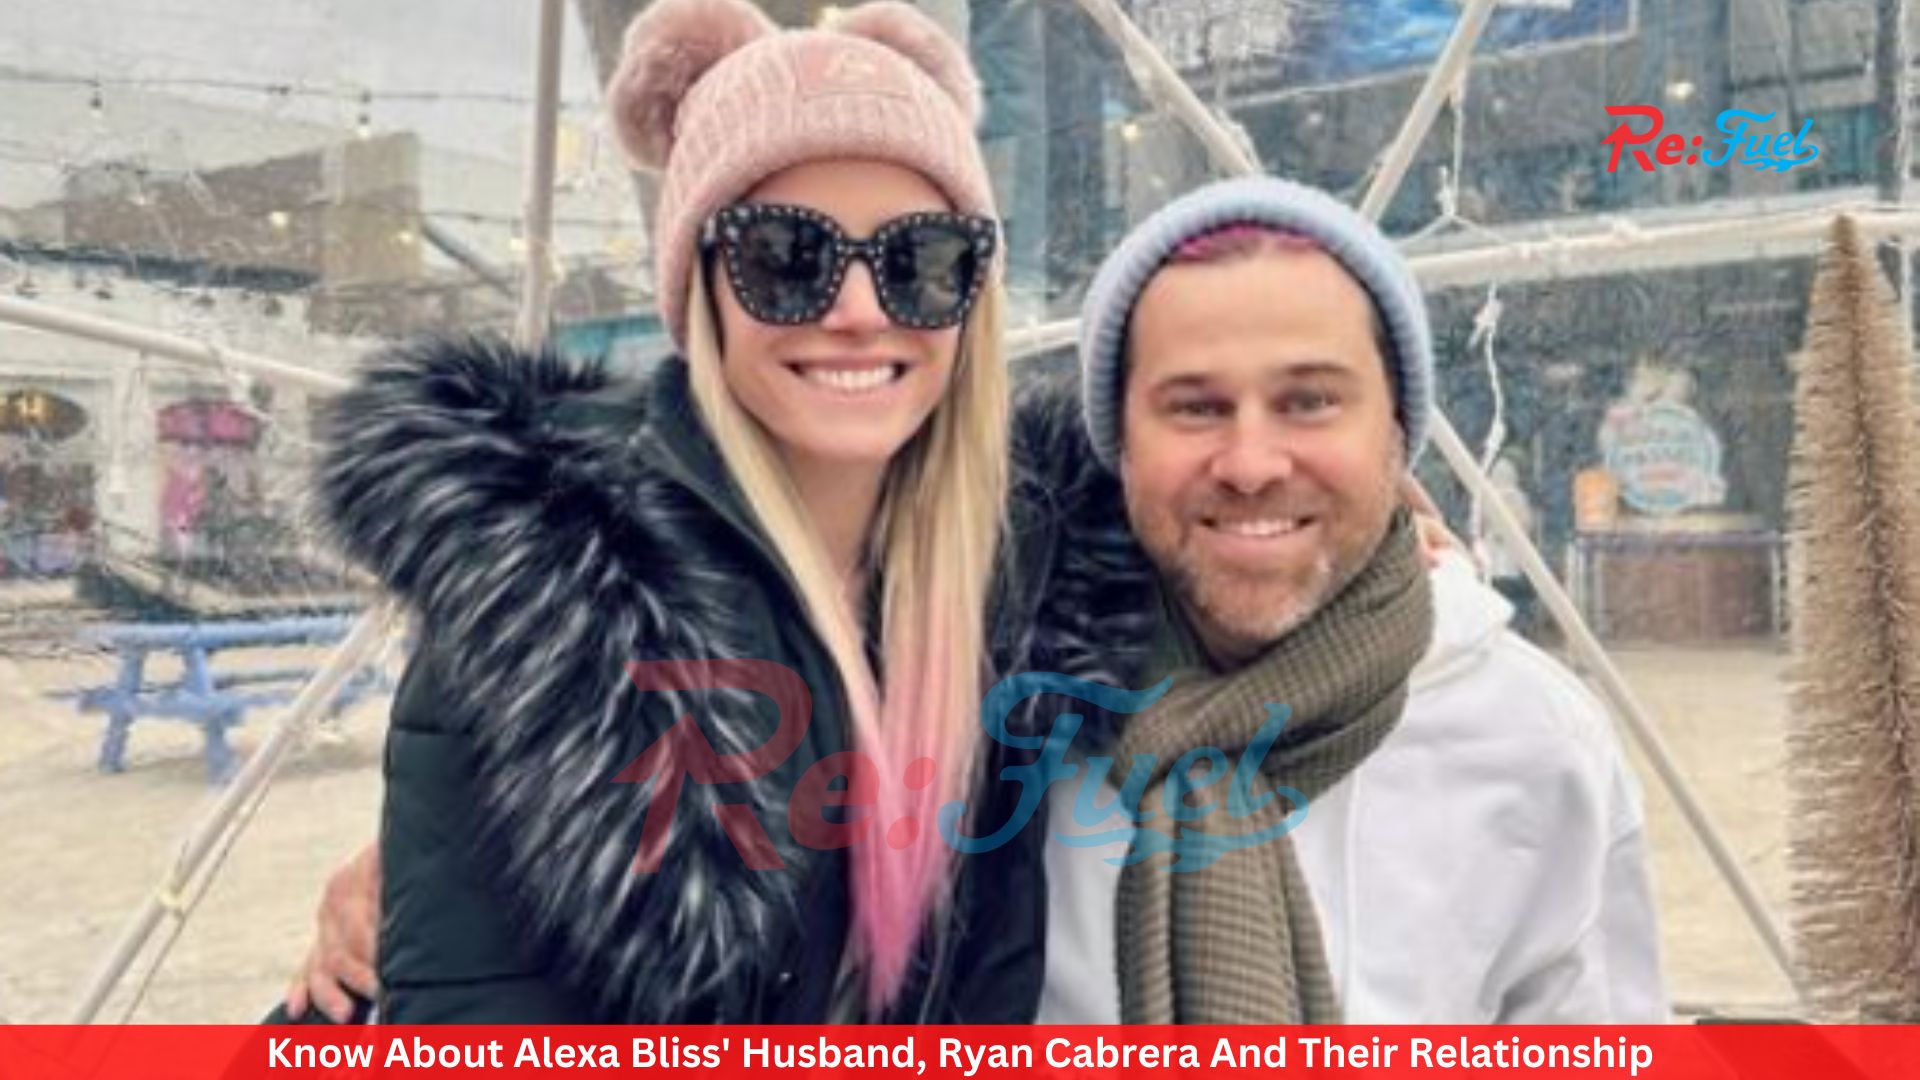 Know About Alexa Bliss' Husband, Ryan Cabrera And Their Relationship